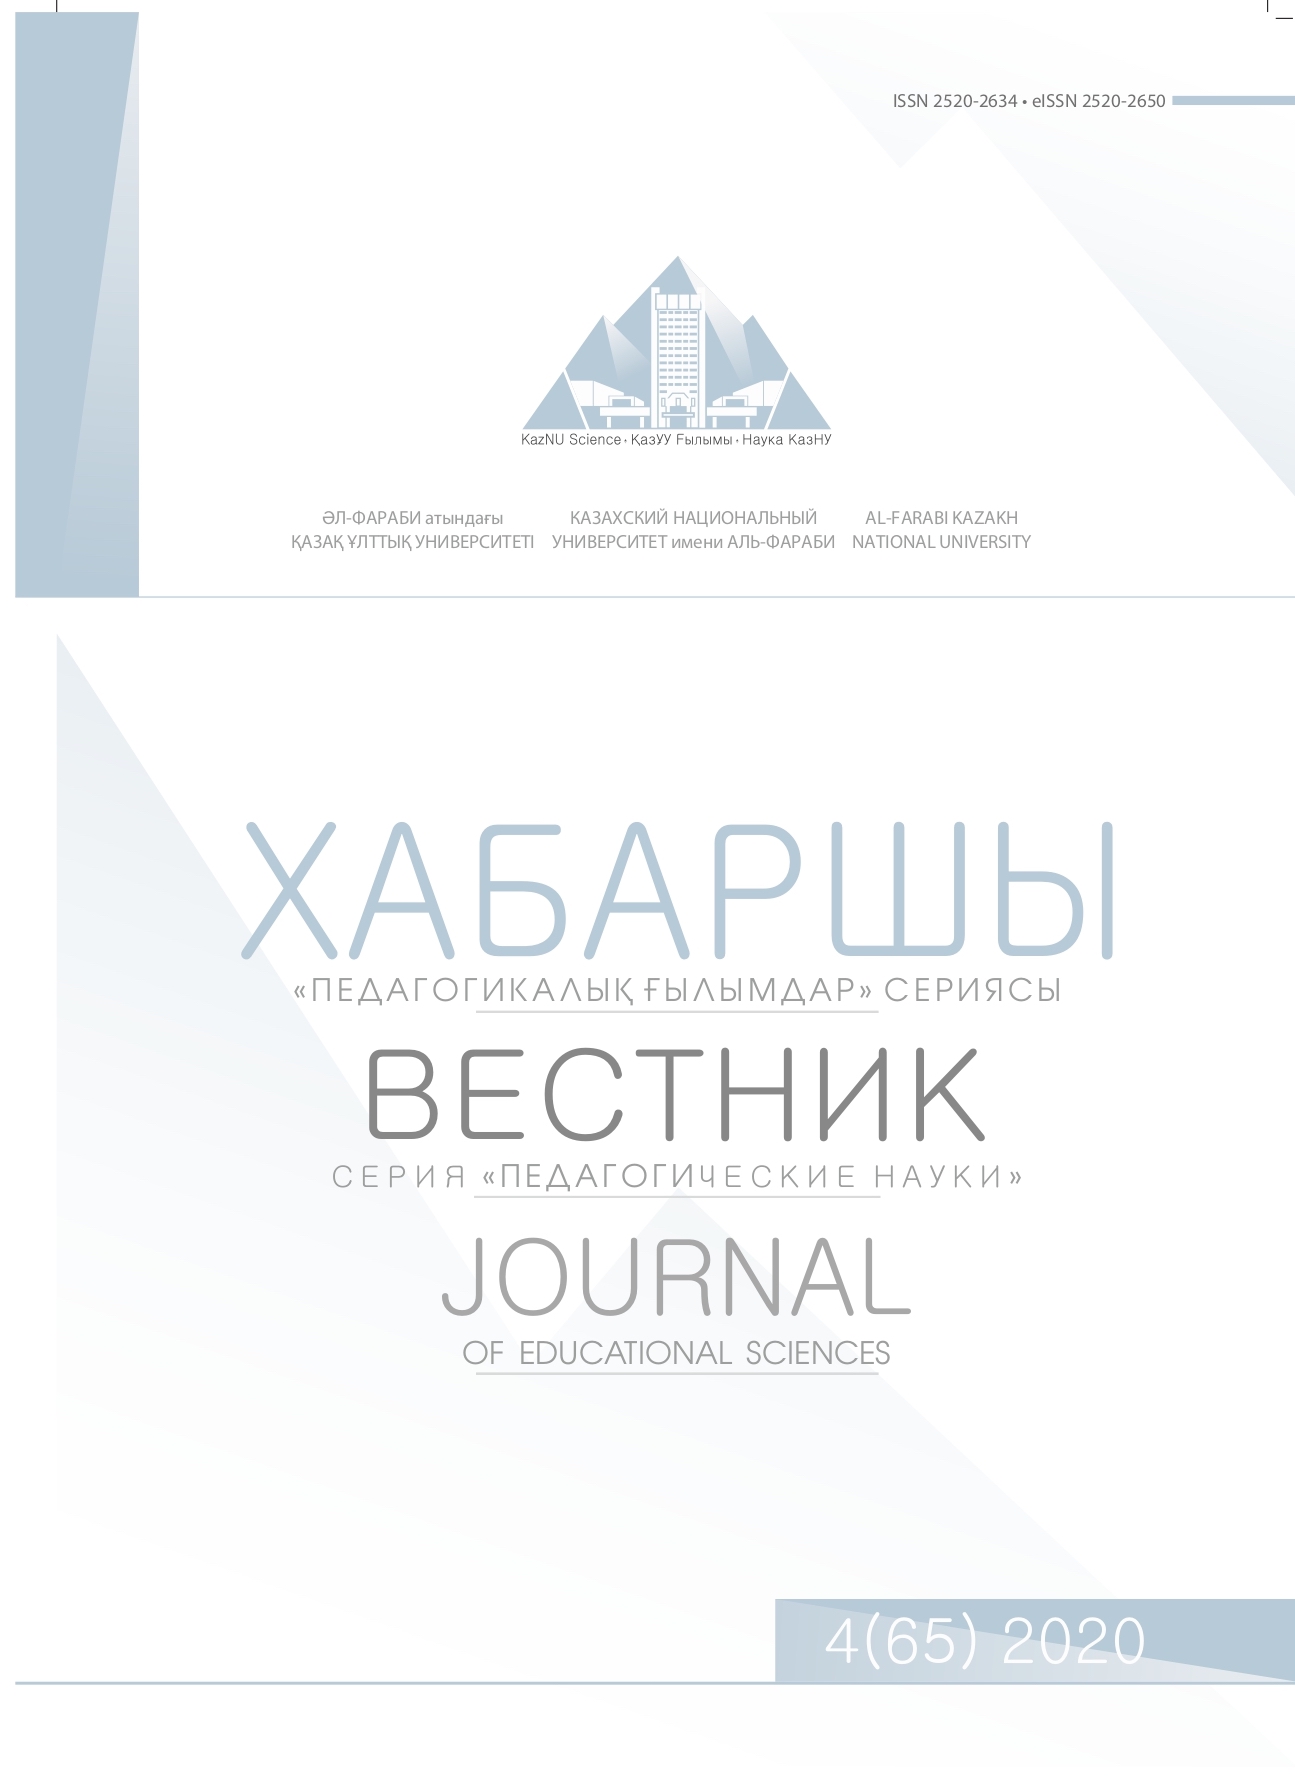 					View Vol. 65 No. 4 (2020): OF EDUCATIONAL SCIENCES JOURNAL
				